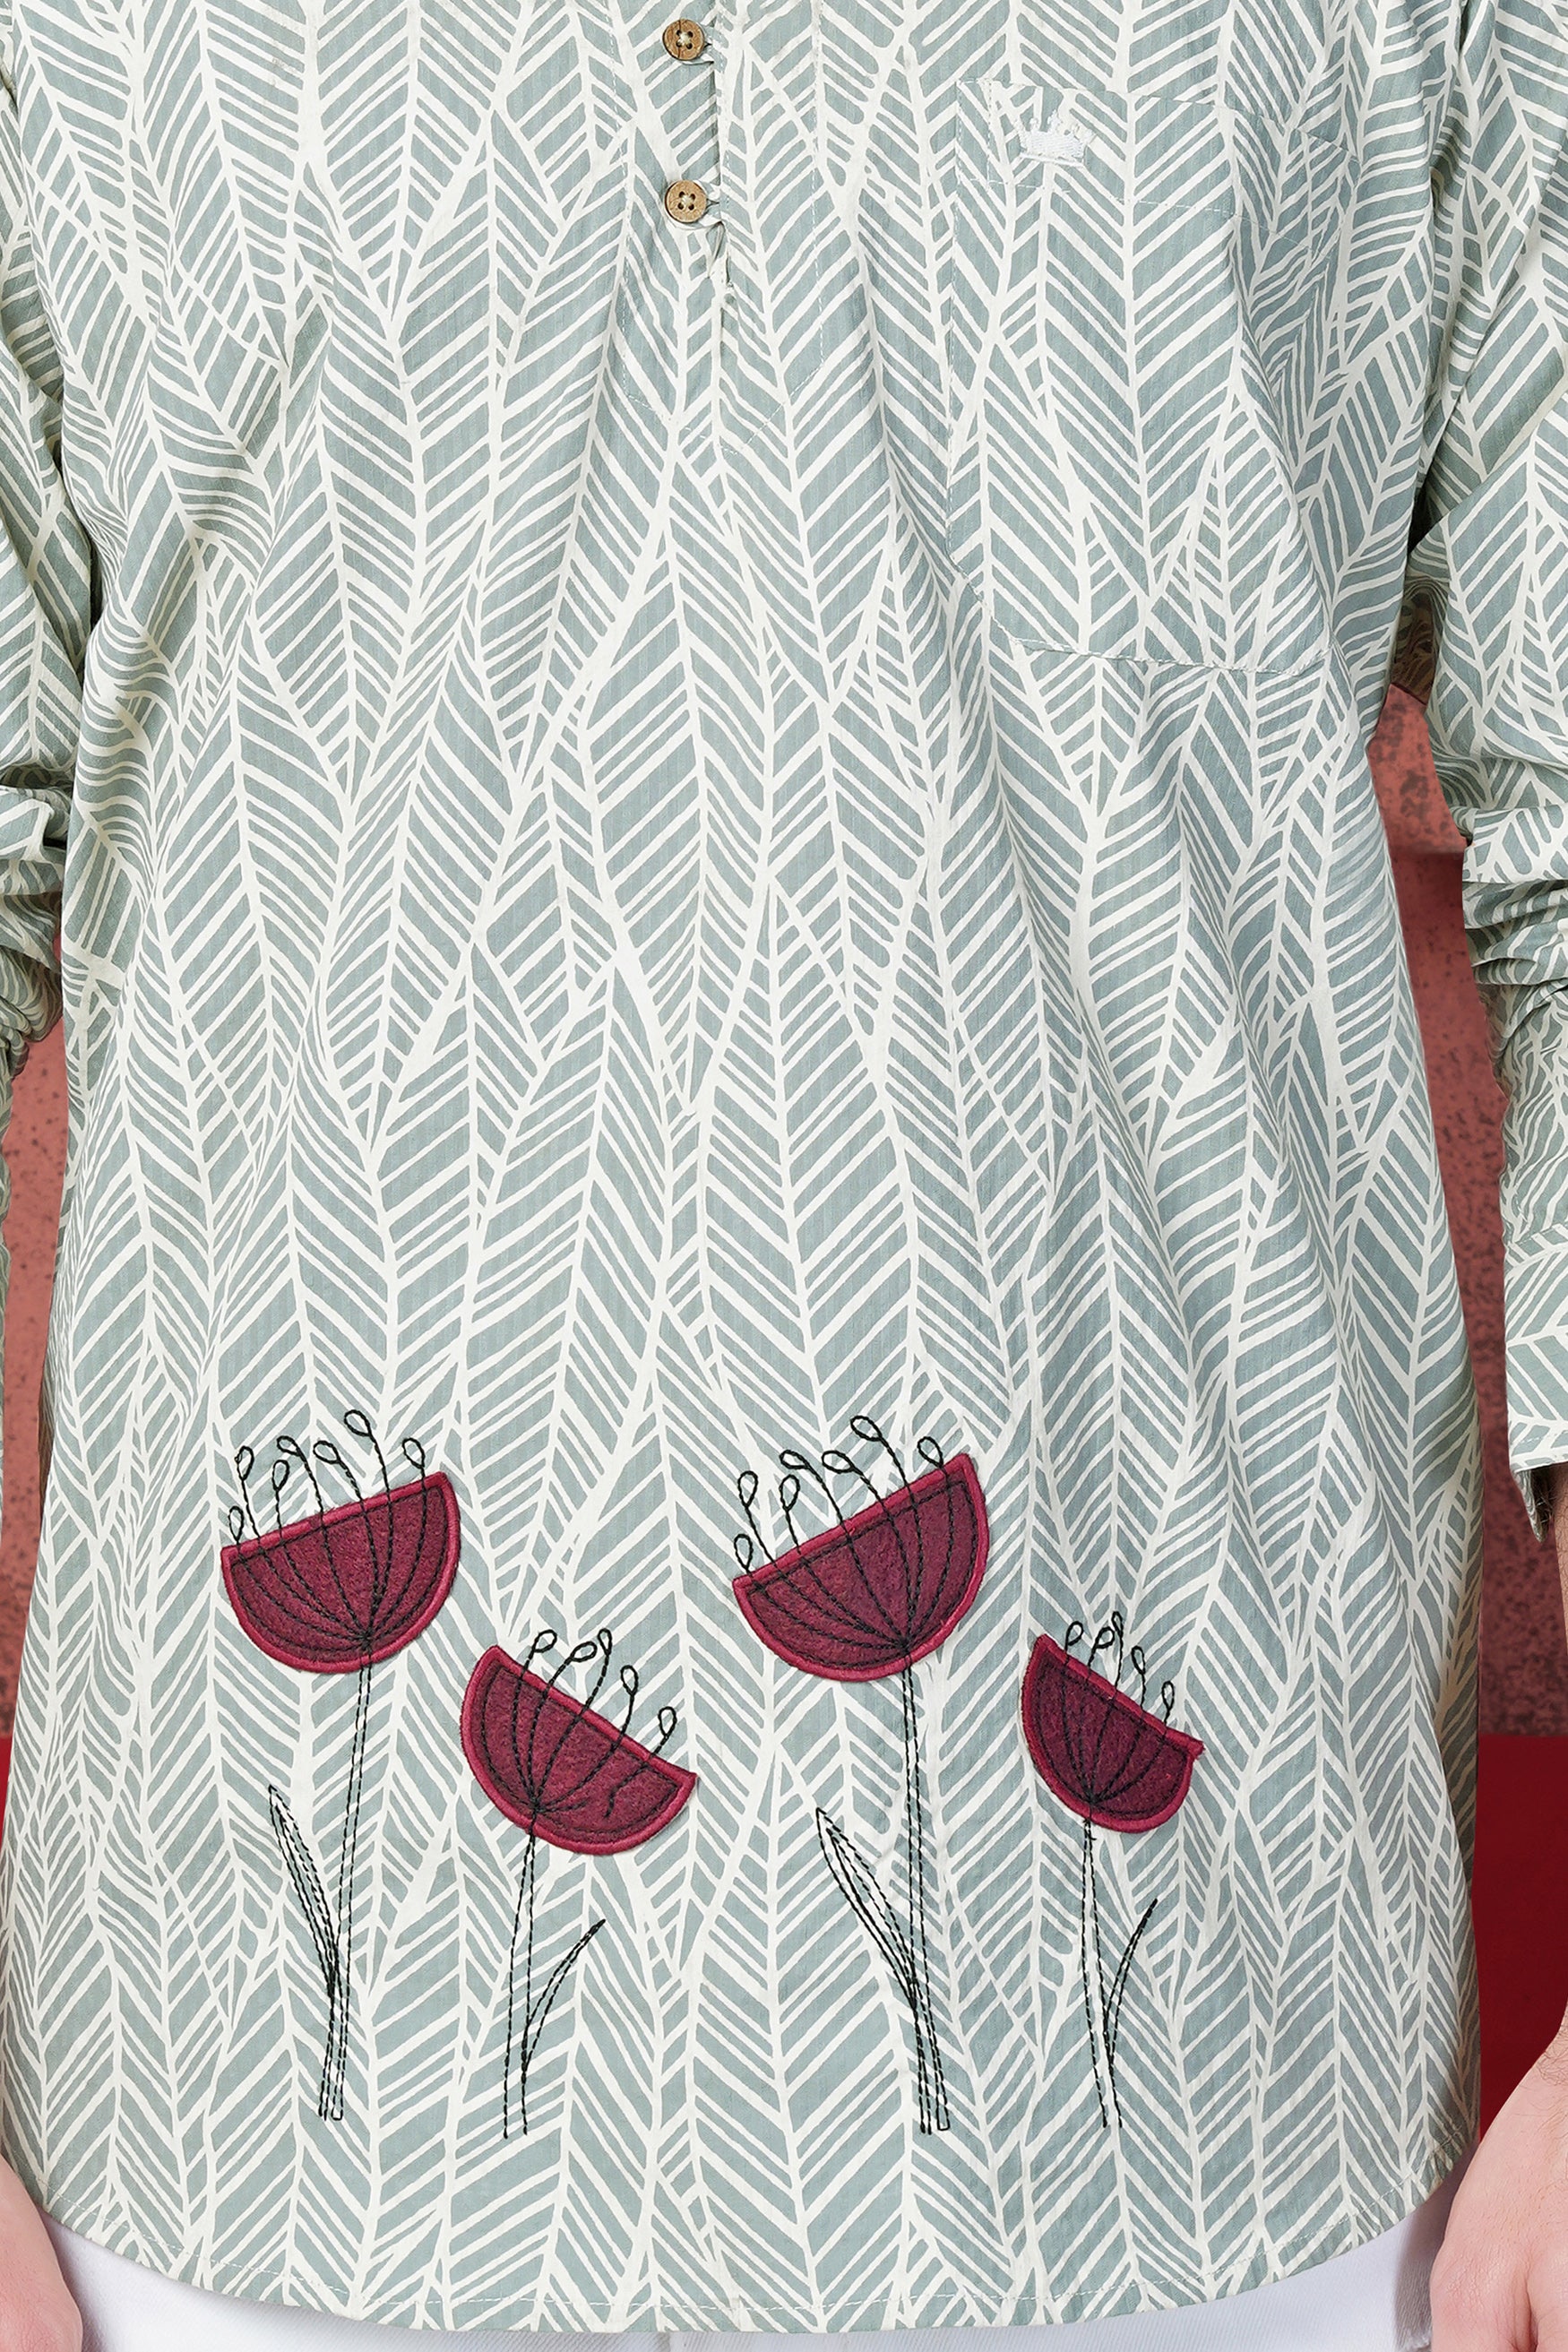 Chalice Gray Printed with Floral Embroidered Premium Cotton Designer Kurta Shirt